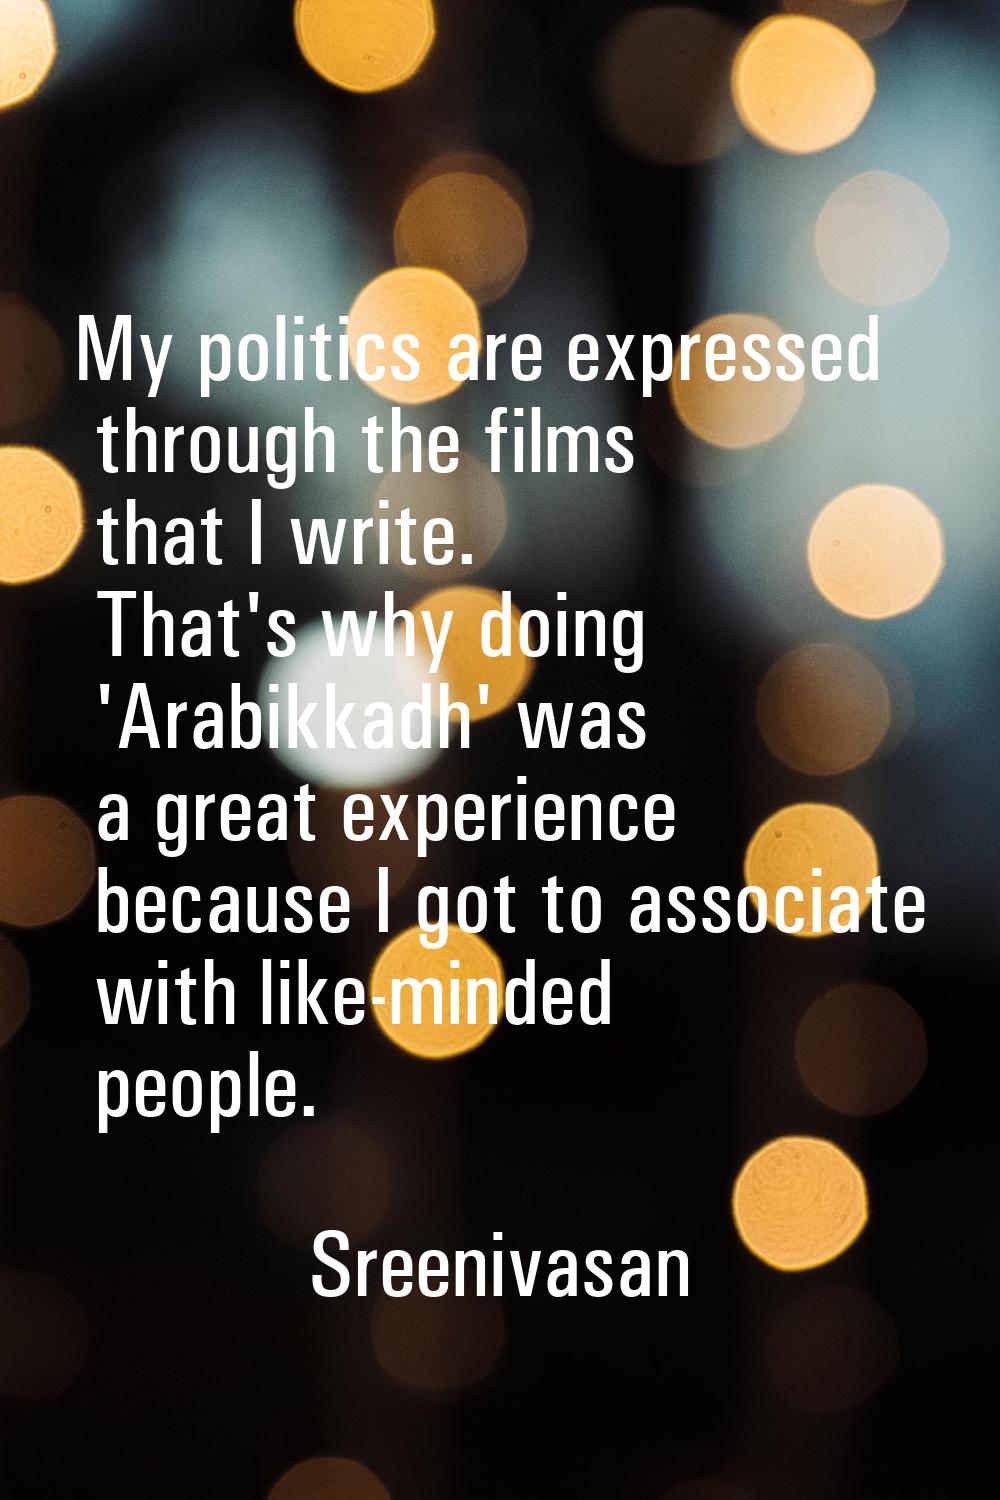 My politics are expressed through the films that I write. That's why doing 'Arabikkadh' was a great